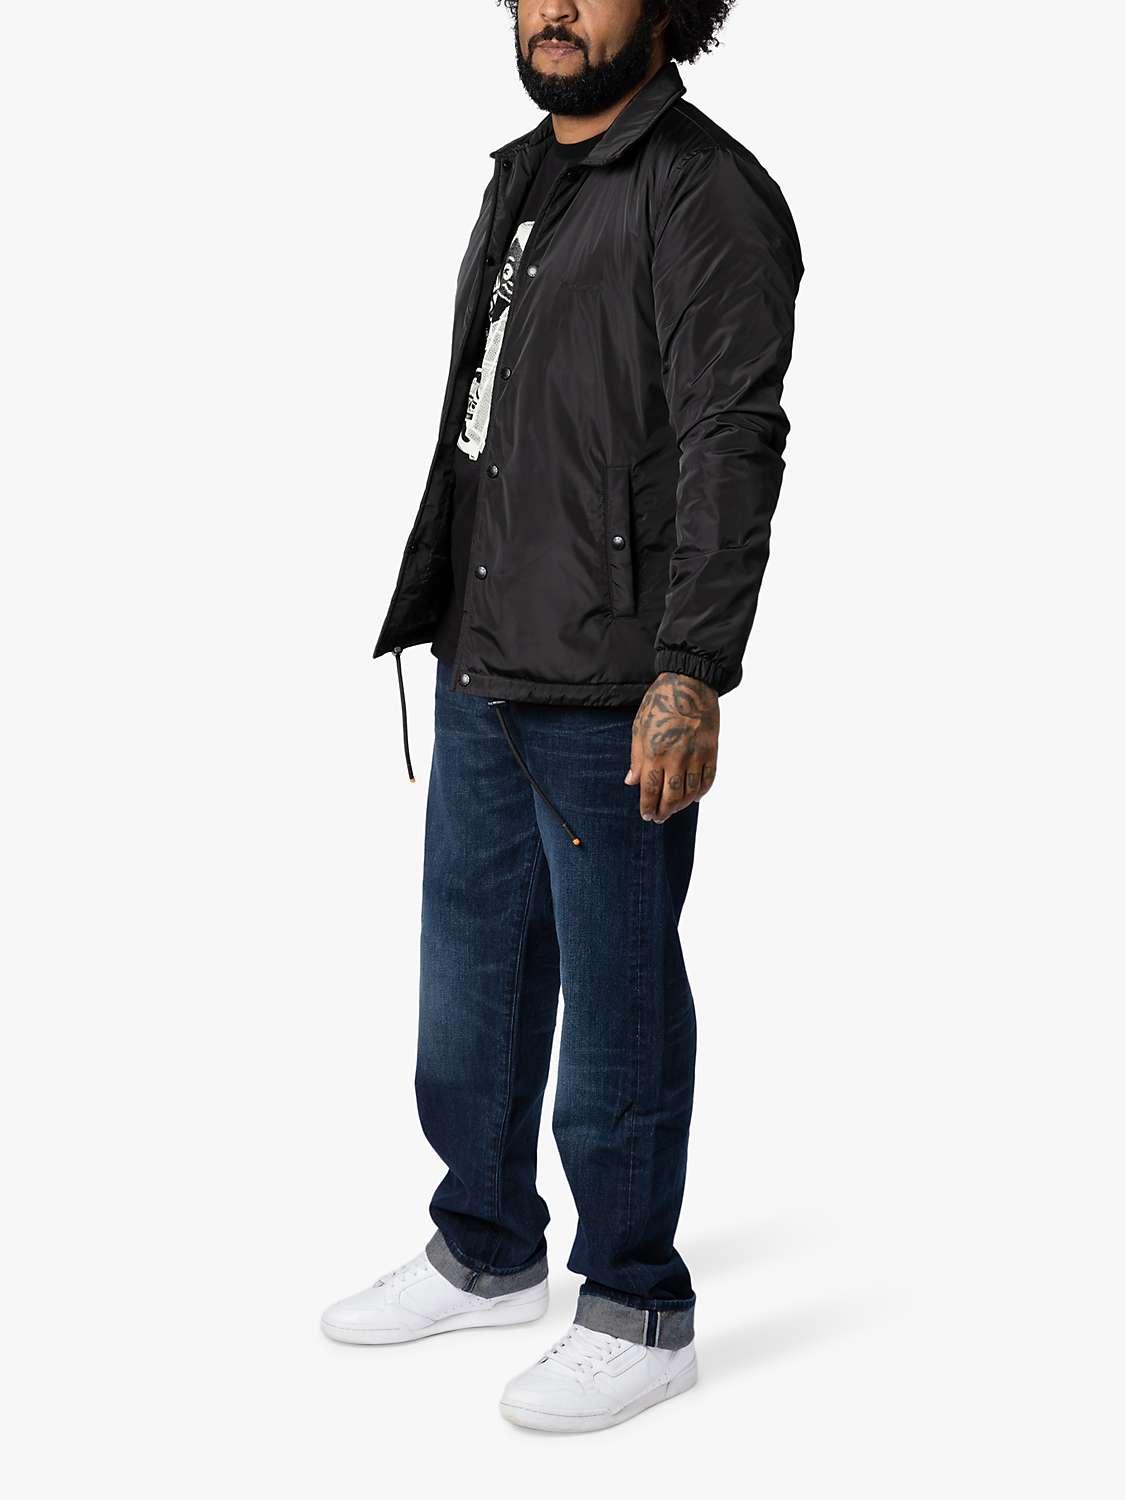 Buy M.C.Overalls Puffer Coach Jacket Online at johnlewis.com